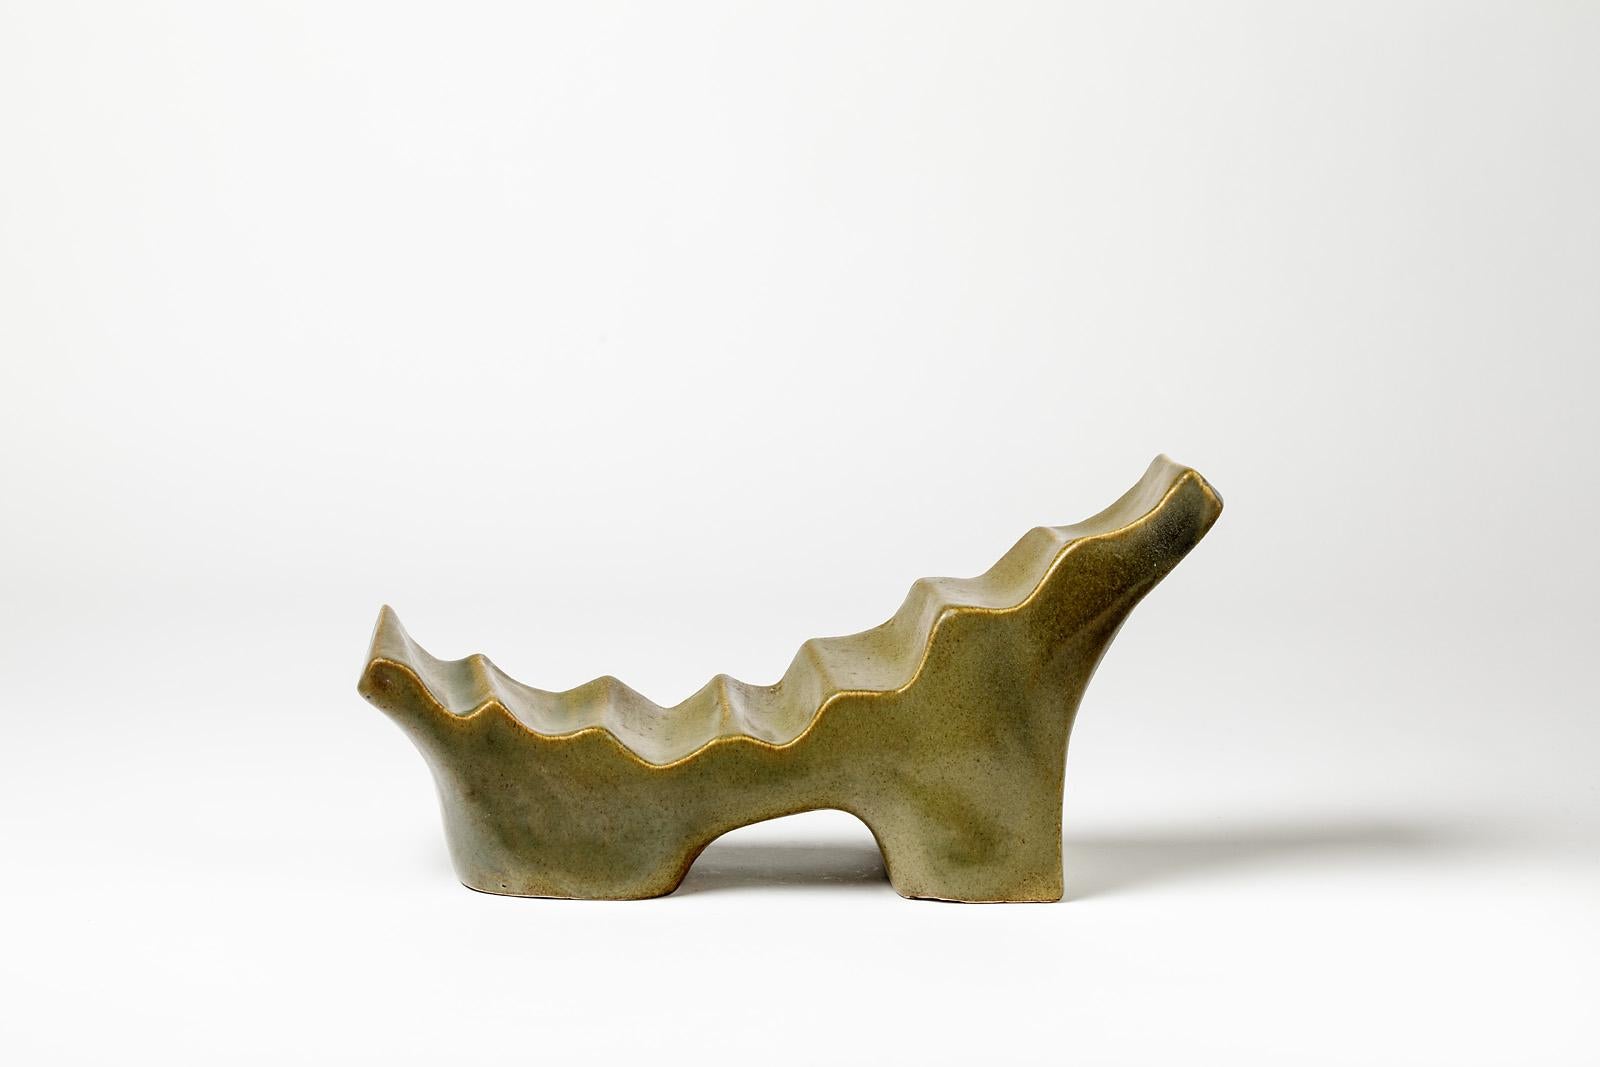 20th Century Porcelain Sculpture with Green Glaze Decoration by Tim Orr, circa 1970